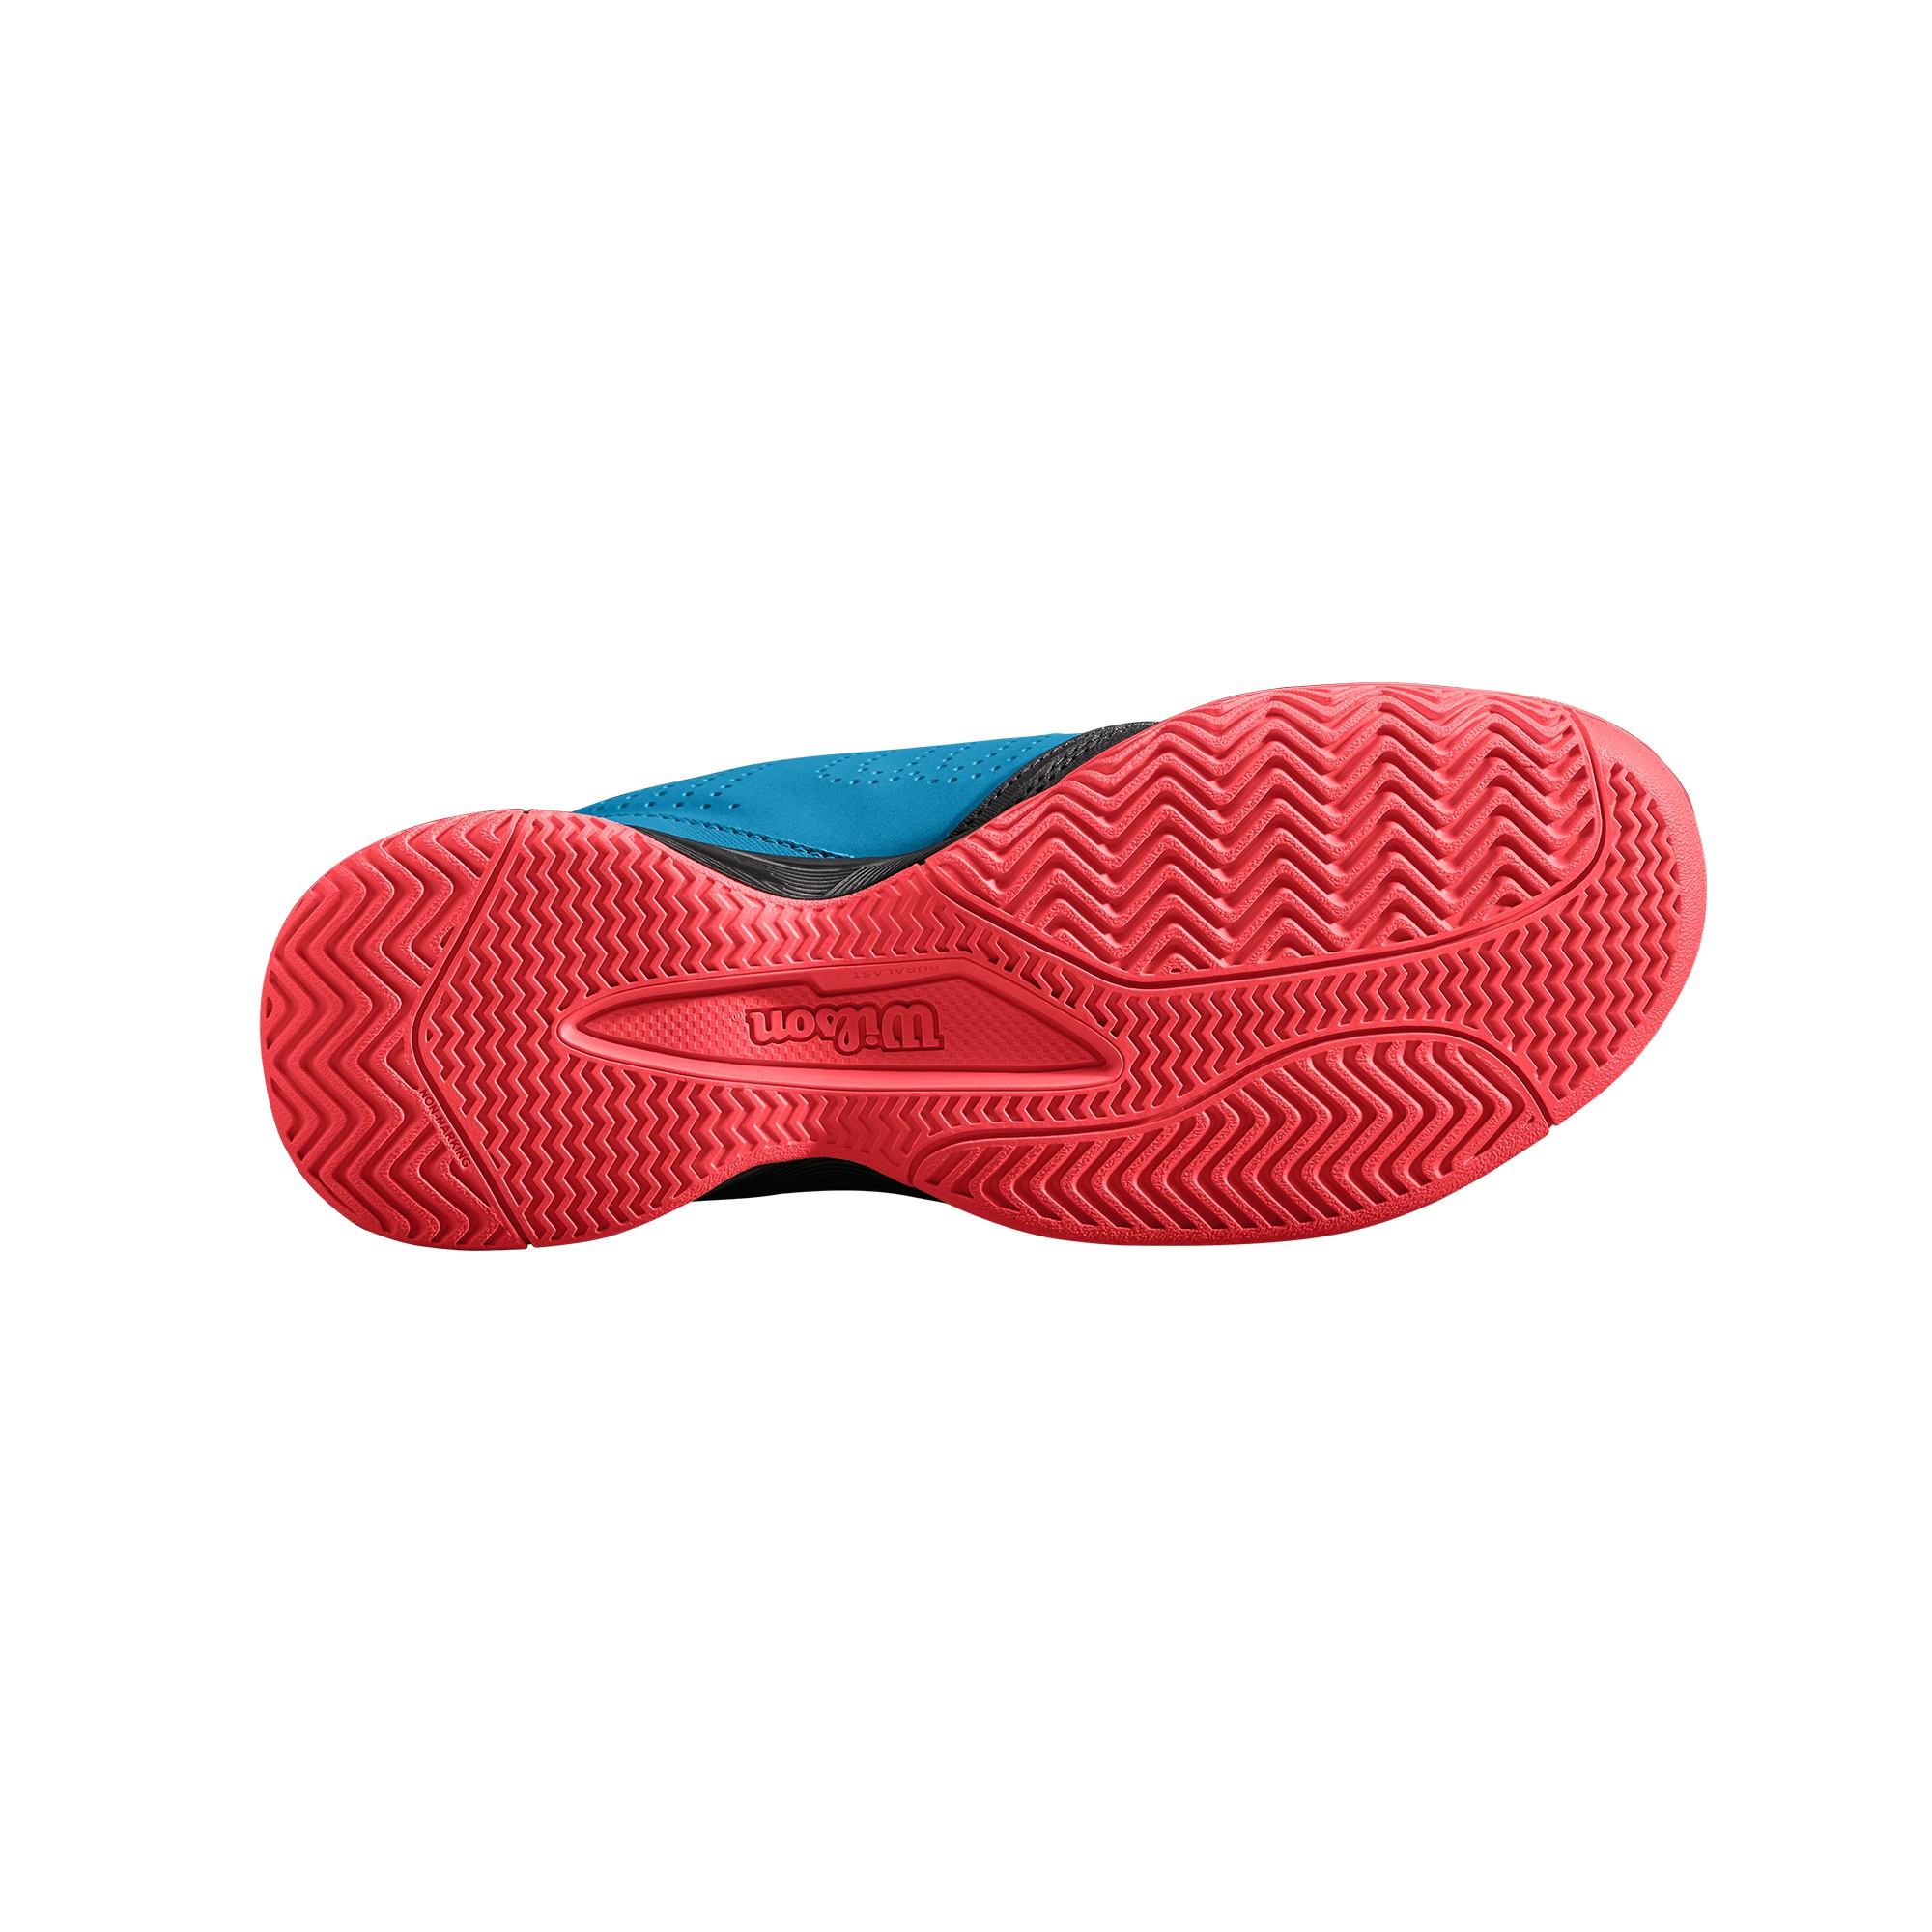 Wilson Kaos Junior AC- Surf/Bk/Coral provides great stability, comfort ...